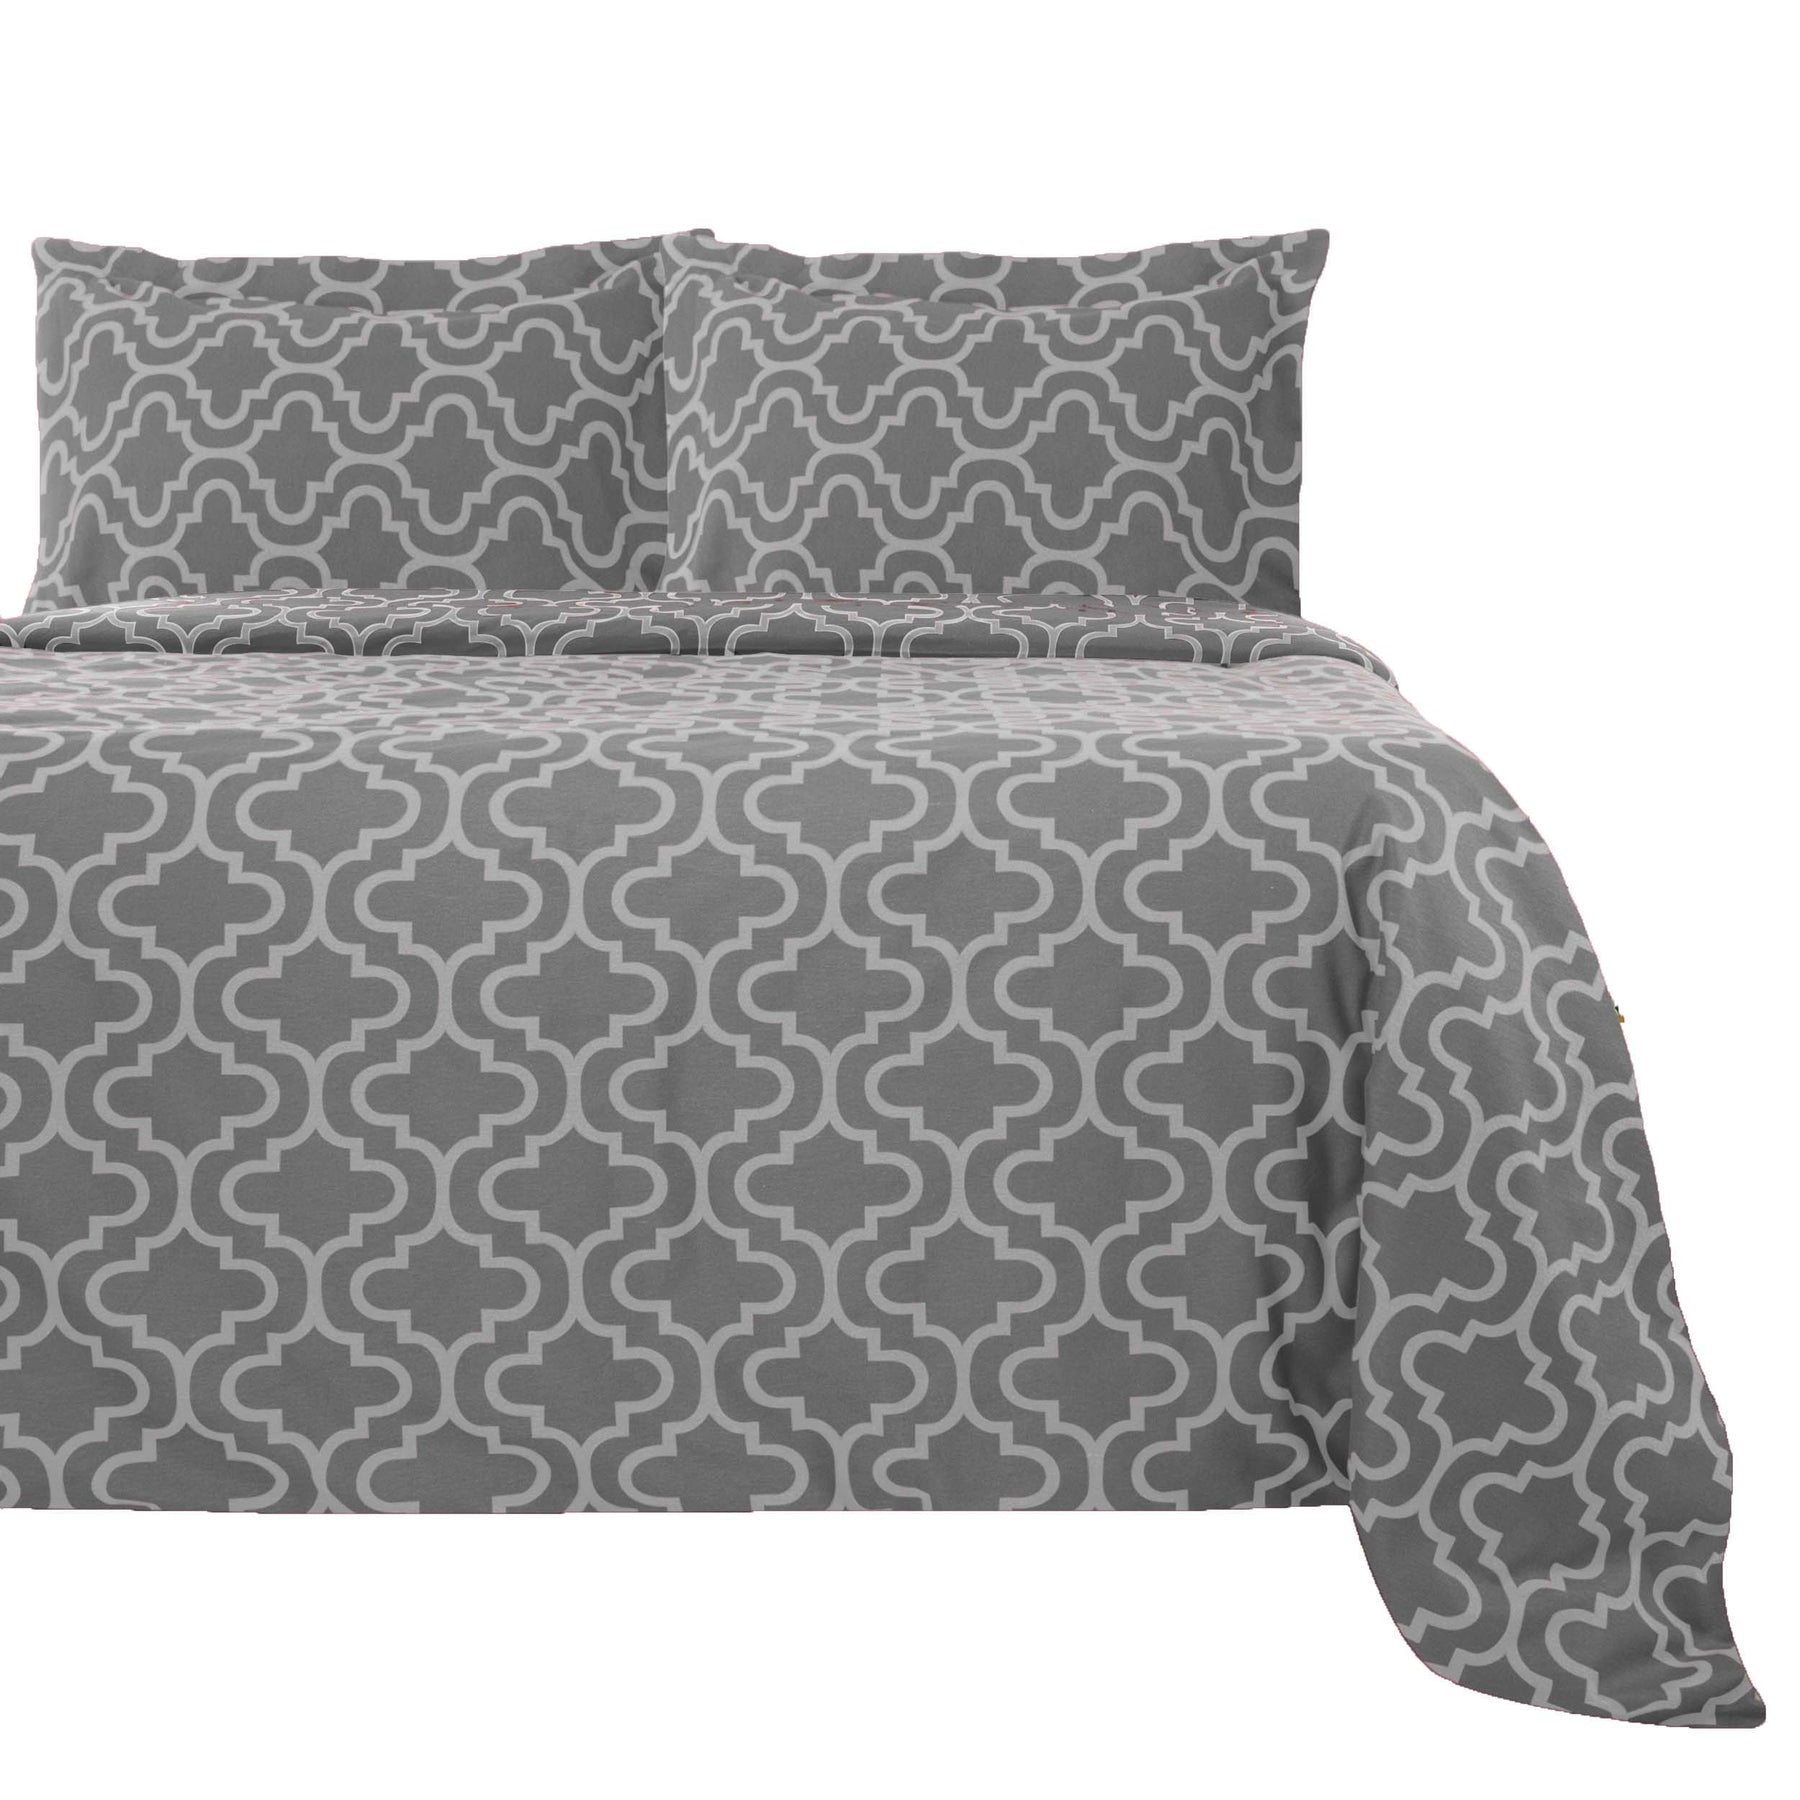 Superior Cotton Flannel Solid or Trellis Heavyweight and Breathable Duvet Cover Set with Button Closure - Grey